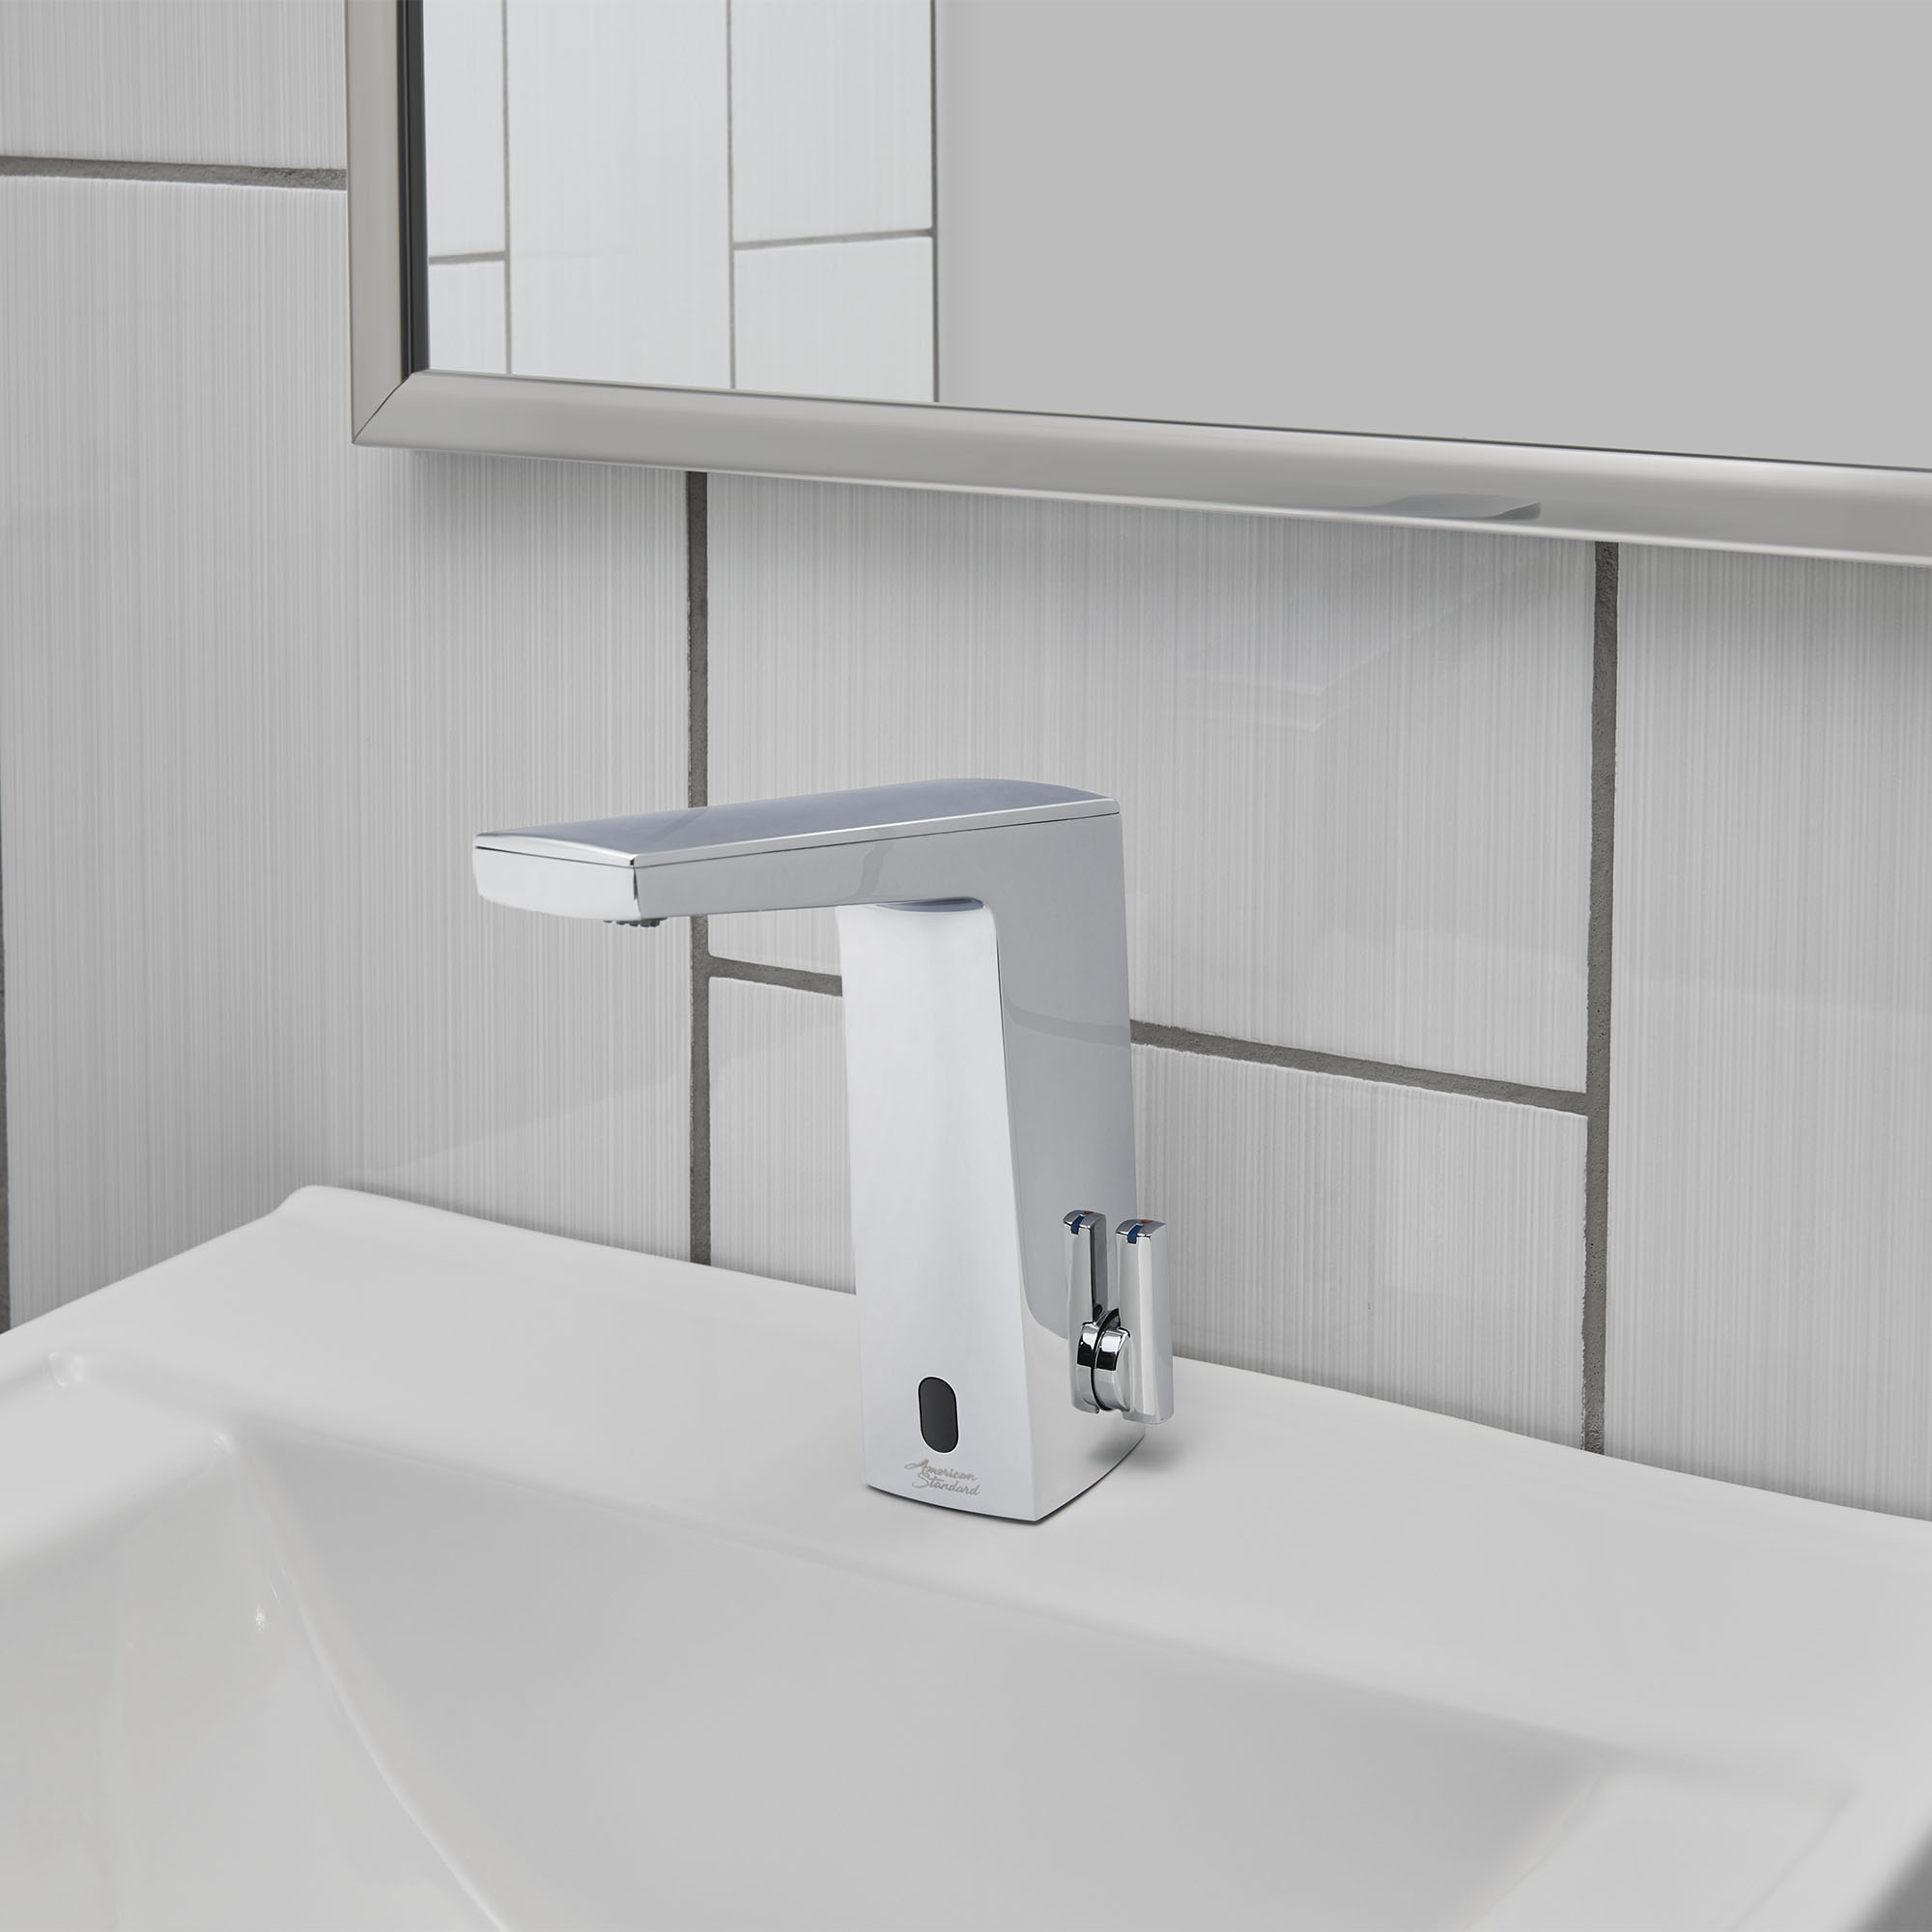 Paradigm™ Selectronic™ Touchless Faucet, Base Model, 0.5 gpm/1.9 Lpm